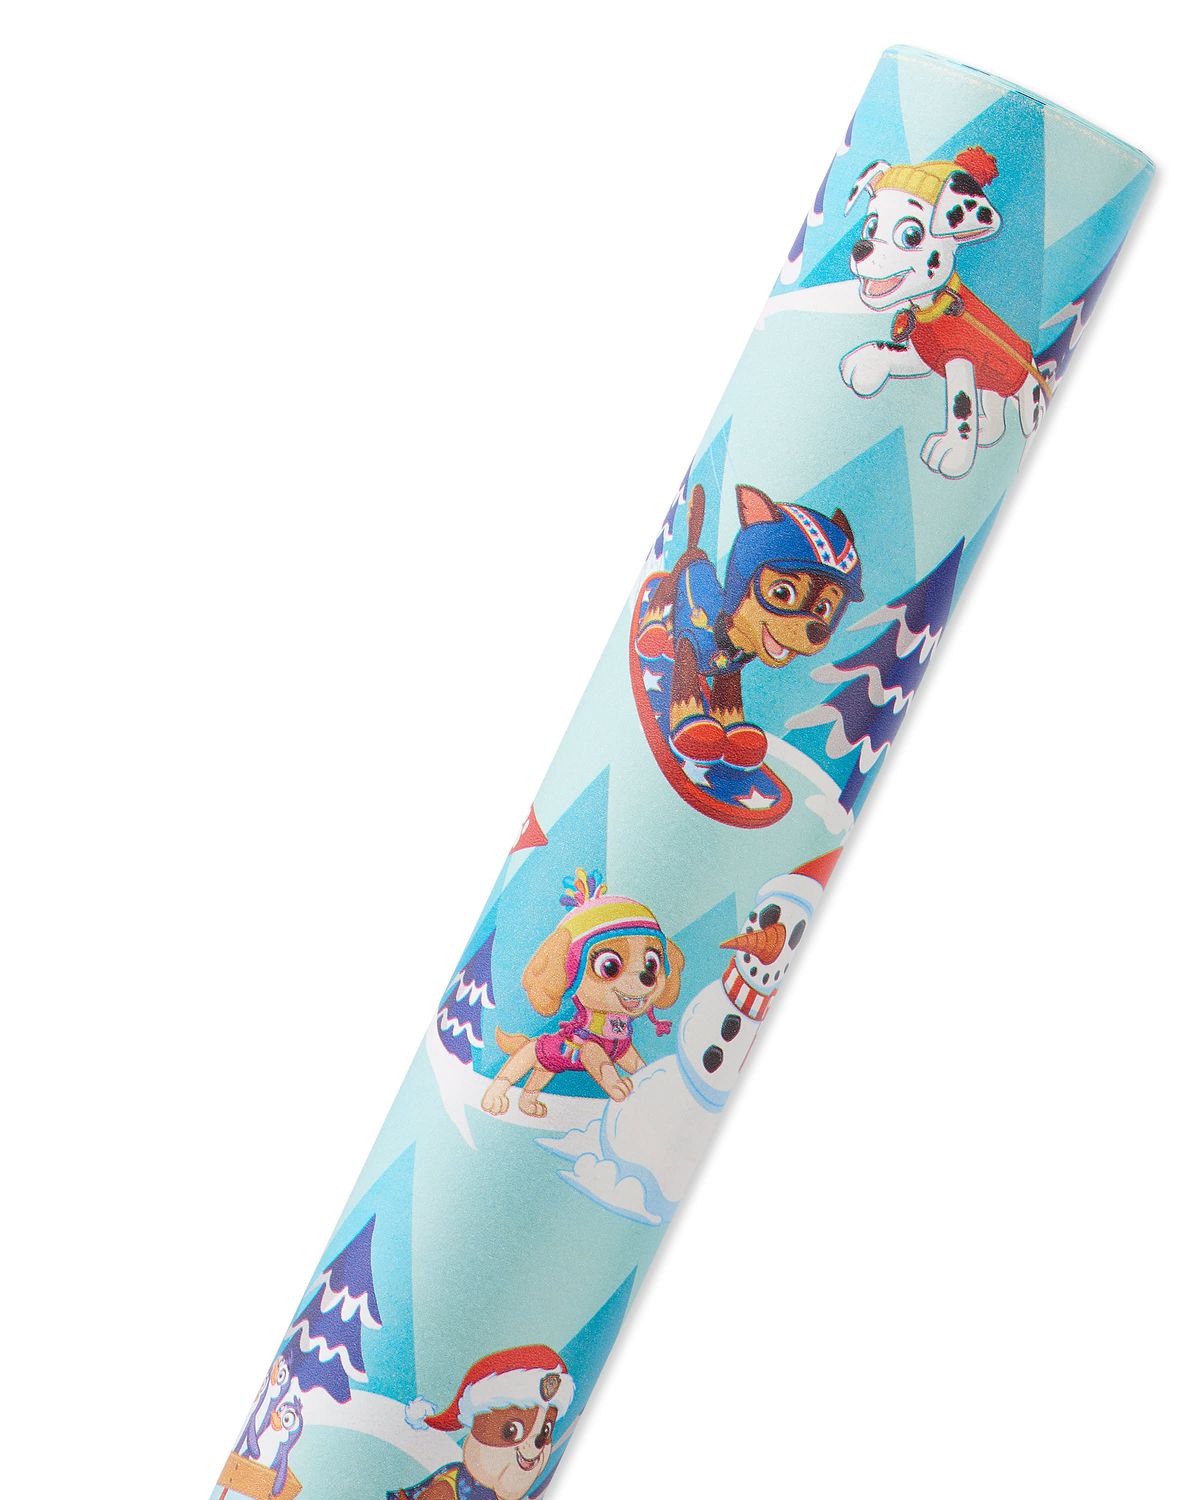 PAW Patrol™ Christmas Wrapping Paper, 40 Total Sq. Ft. | American Greetings